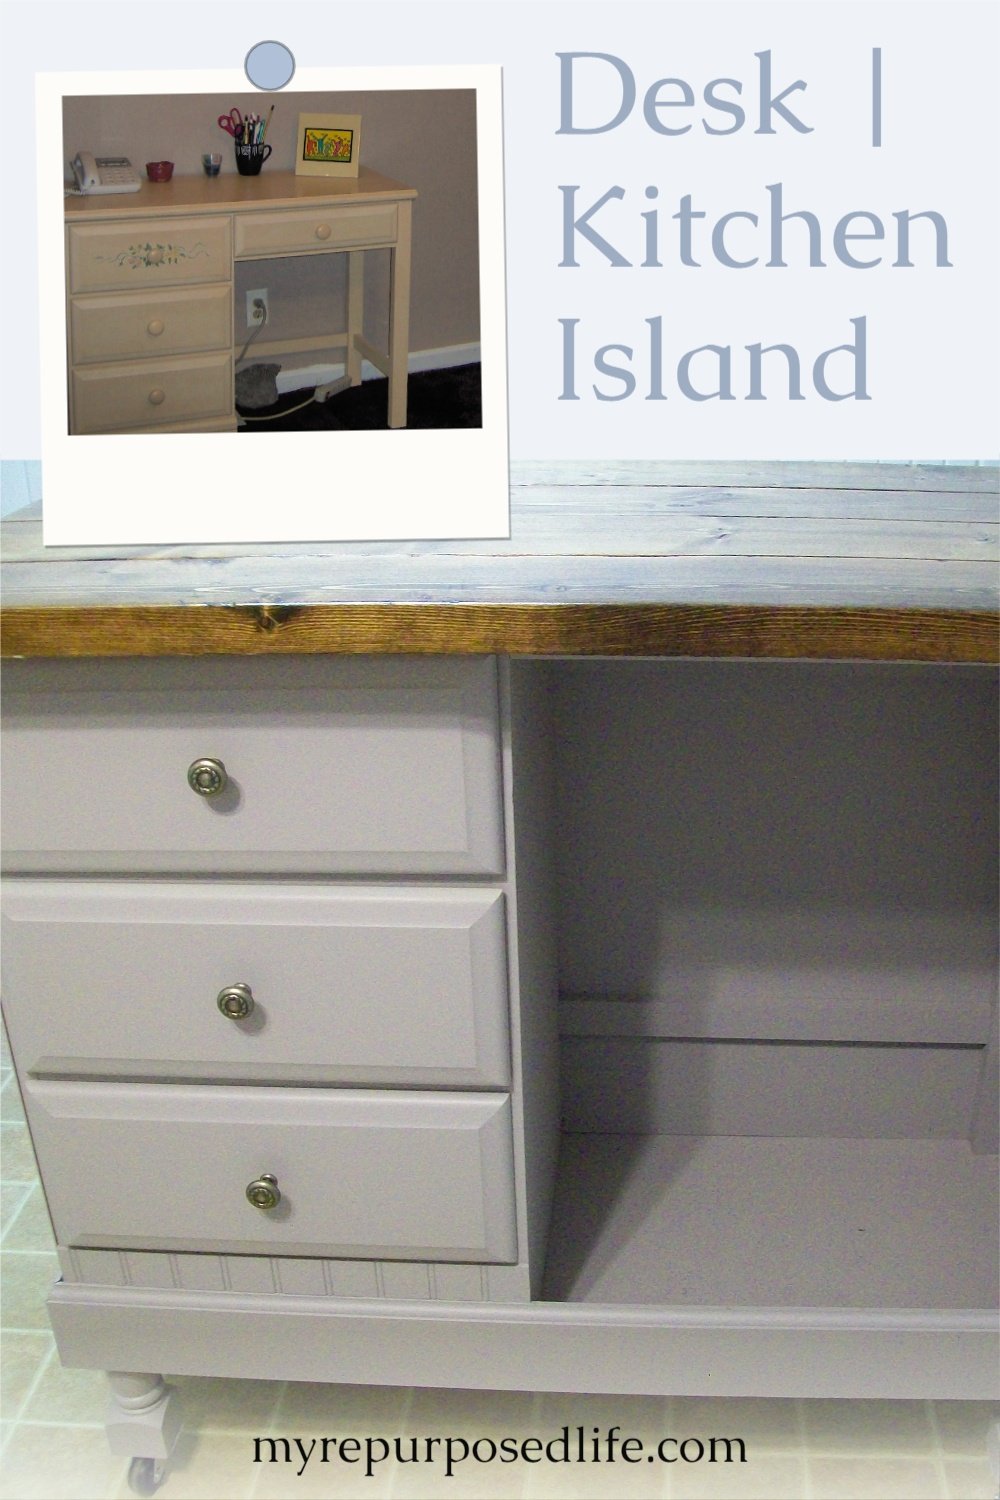 If you have an old desk, but need a kitchen island, this tutorial will show you how to turn that desk into an island. Even a beginner can do this project. #myrepurposedlife #repurposed #upcycle #desk #kitchenisland via @repurposedlife